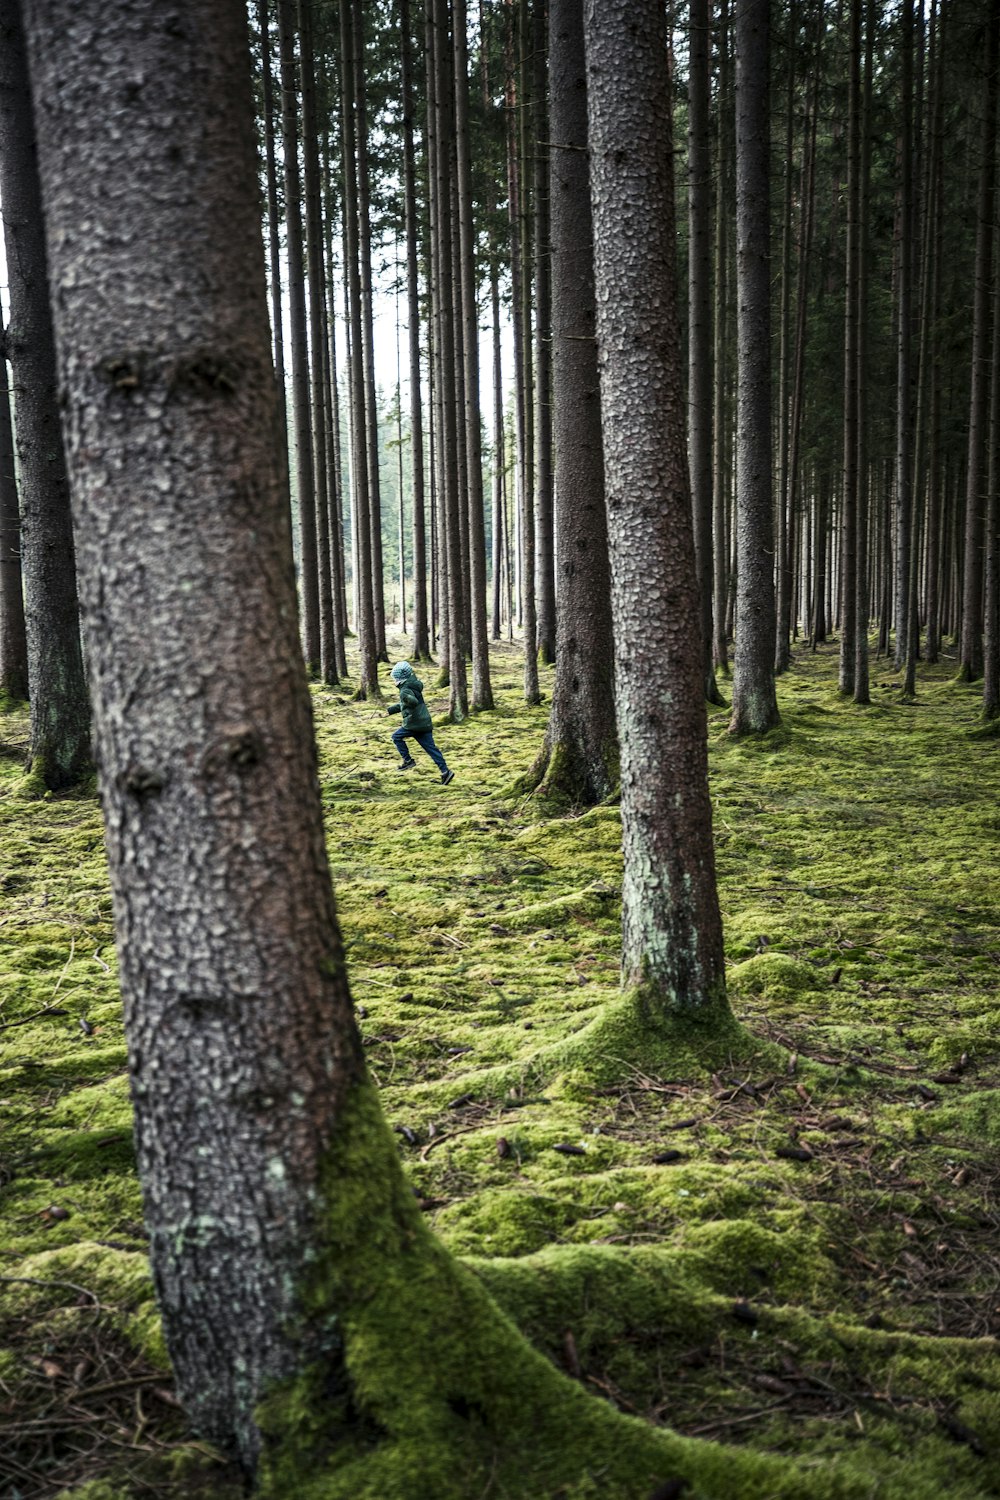 a person walking through a forest of trees